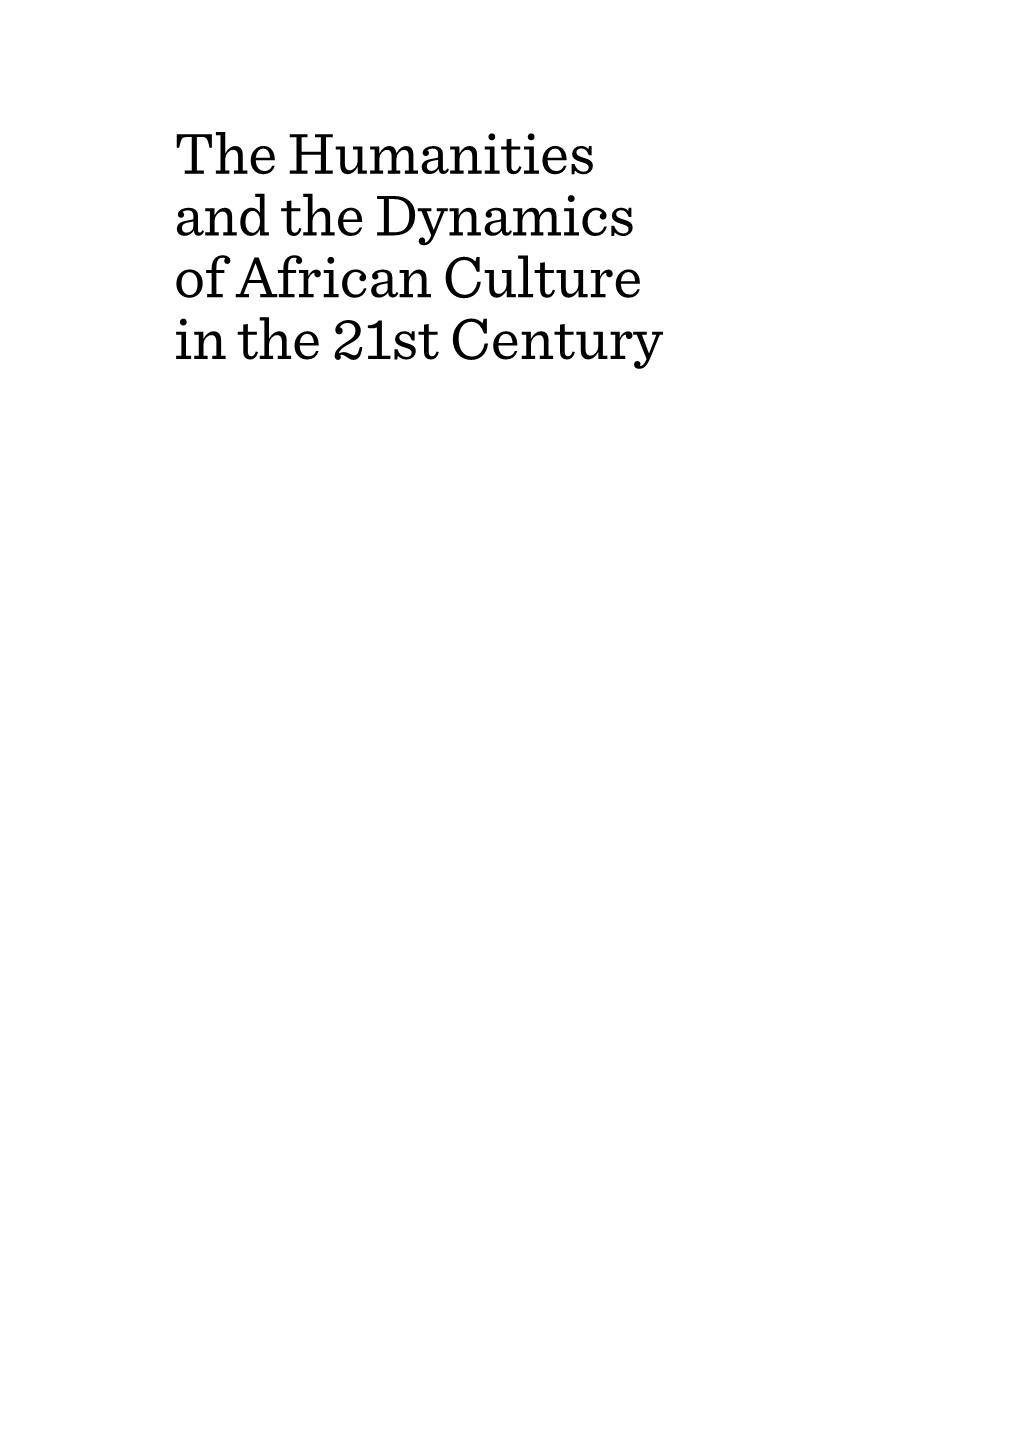 The Humanities and the Dynamics of African Culture in the 21St Century